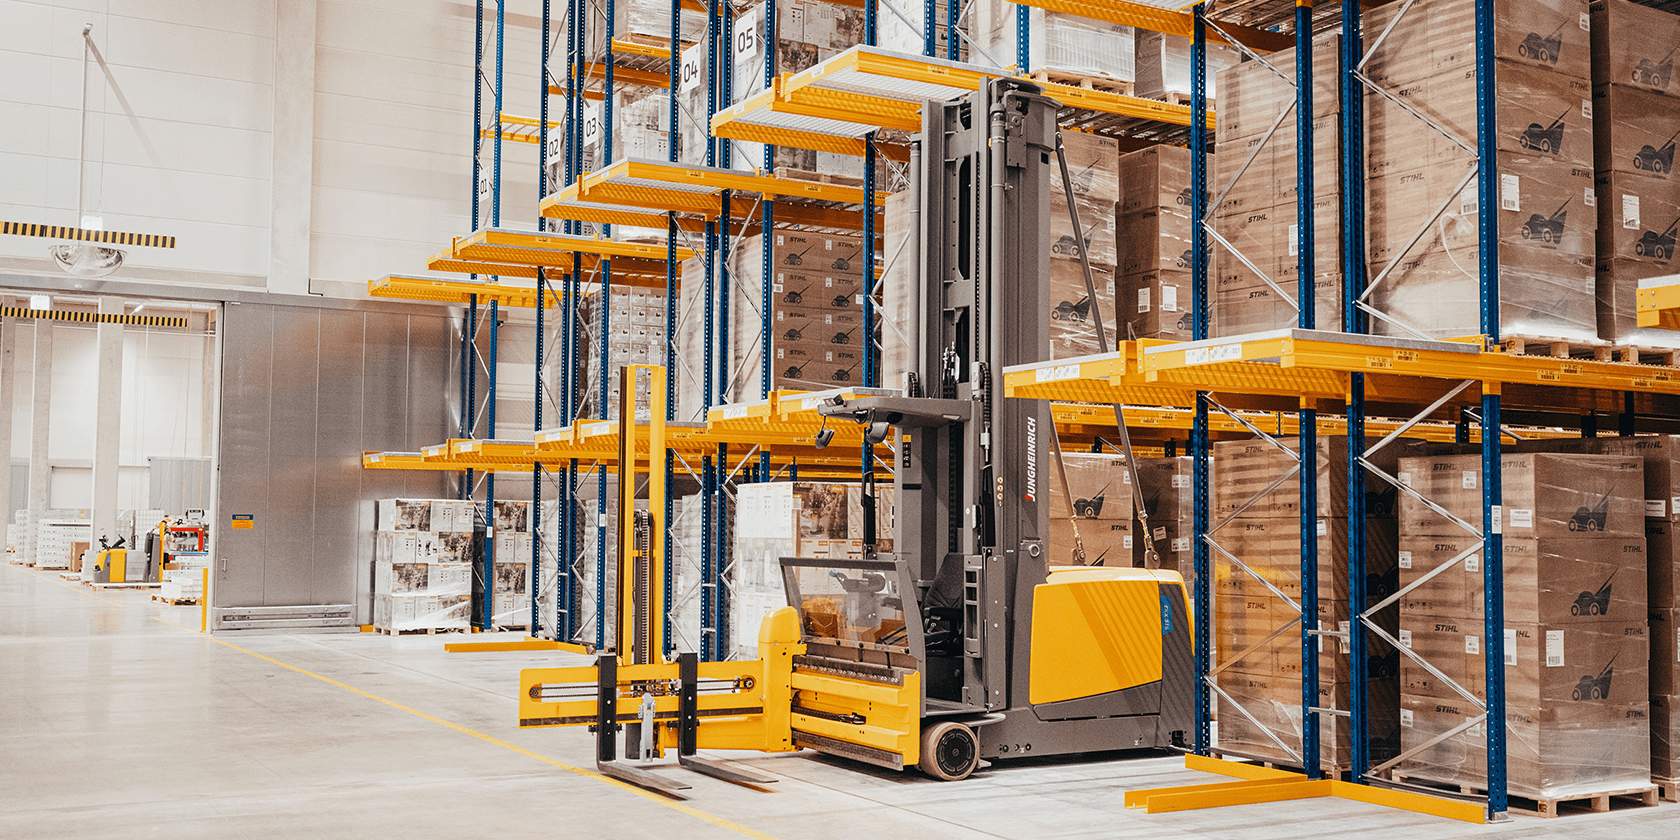 The largest logistics warehouse for the STIHL Group is used to store cordless products and all STIHL tools manufactured at the production site in Tyrol.